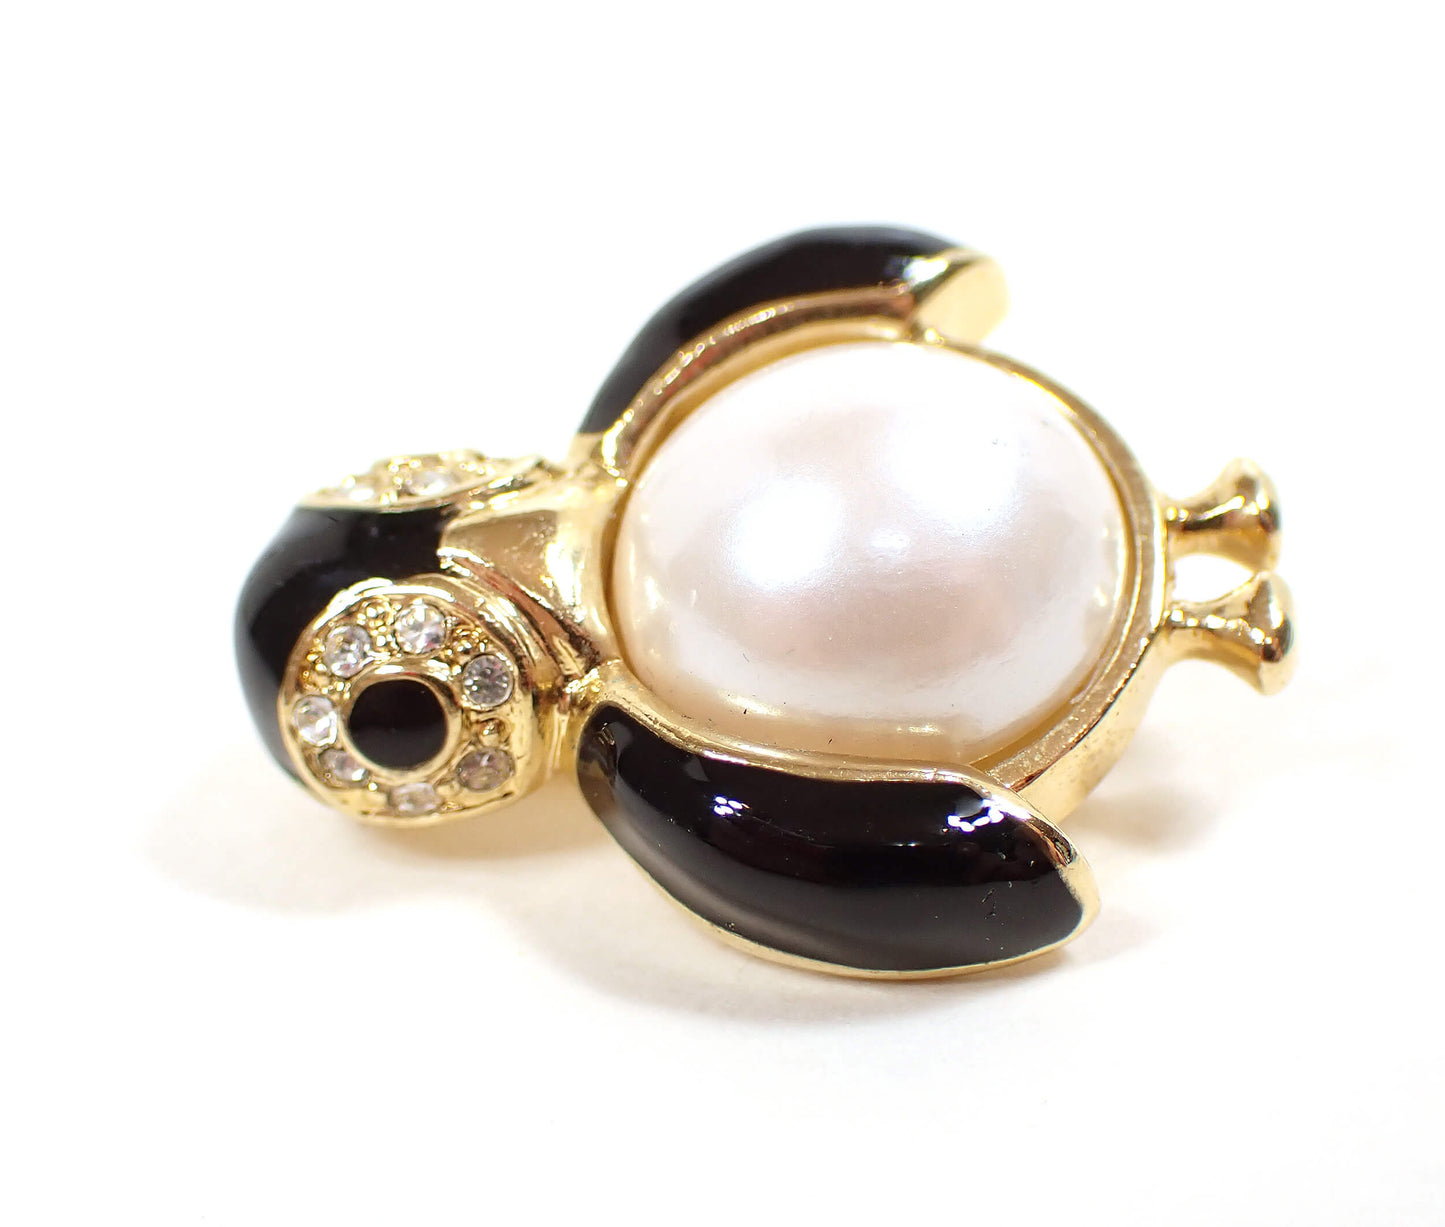 Small Faux Pearl and Rhinestone Marvella Retro Vintage Enameled Penguin Brooch Pin